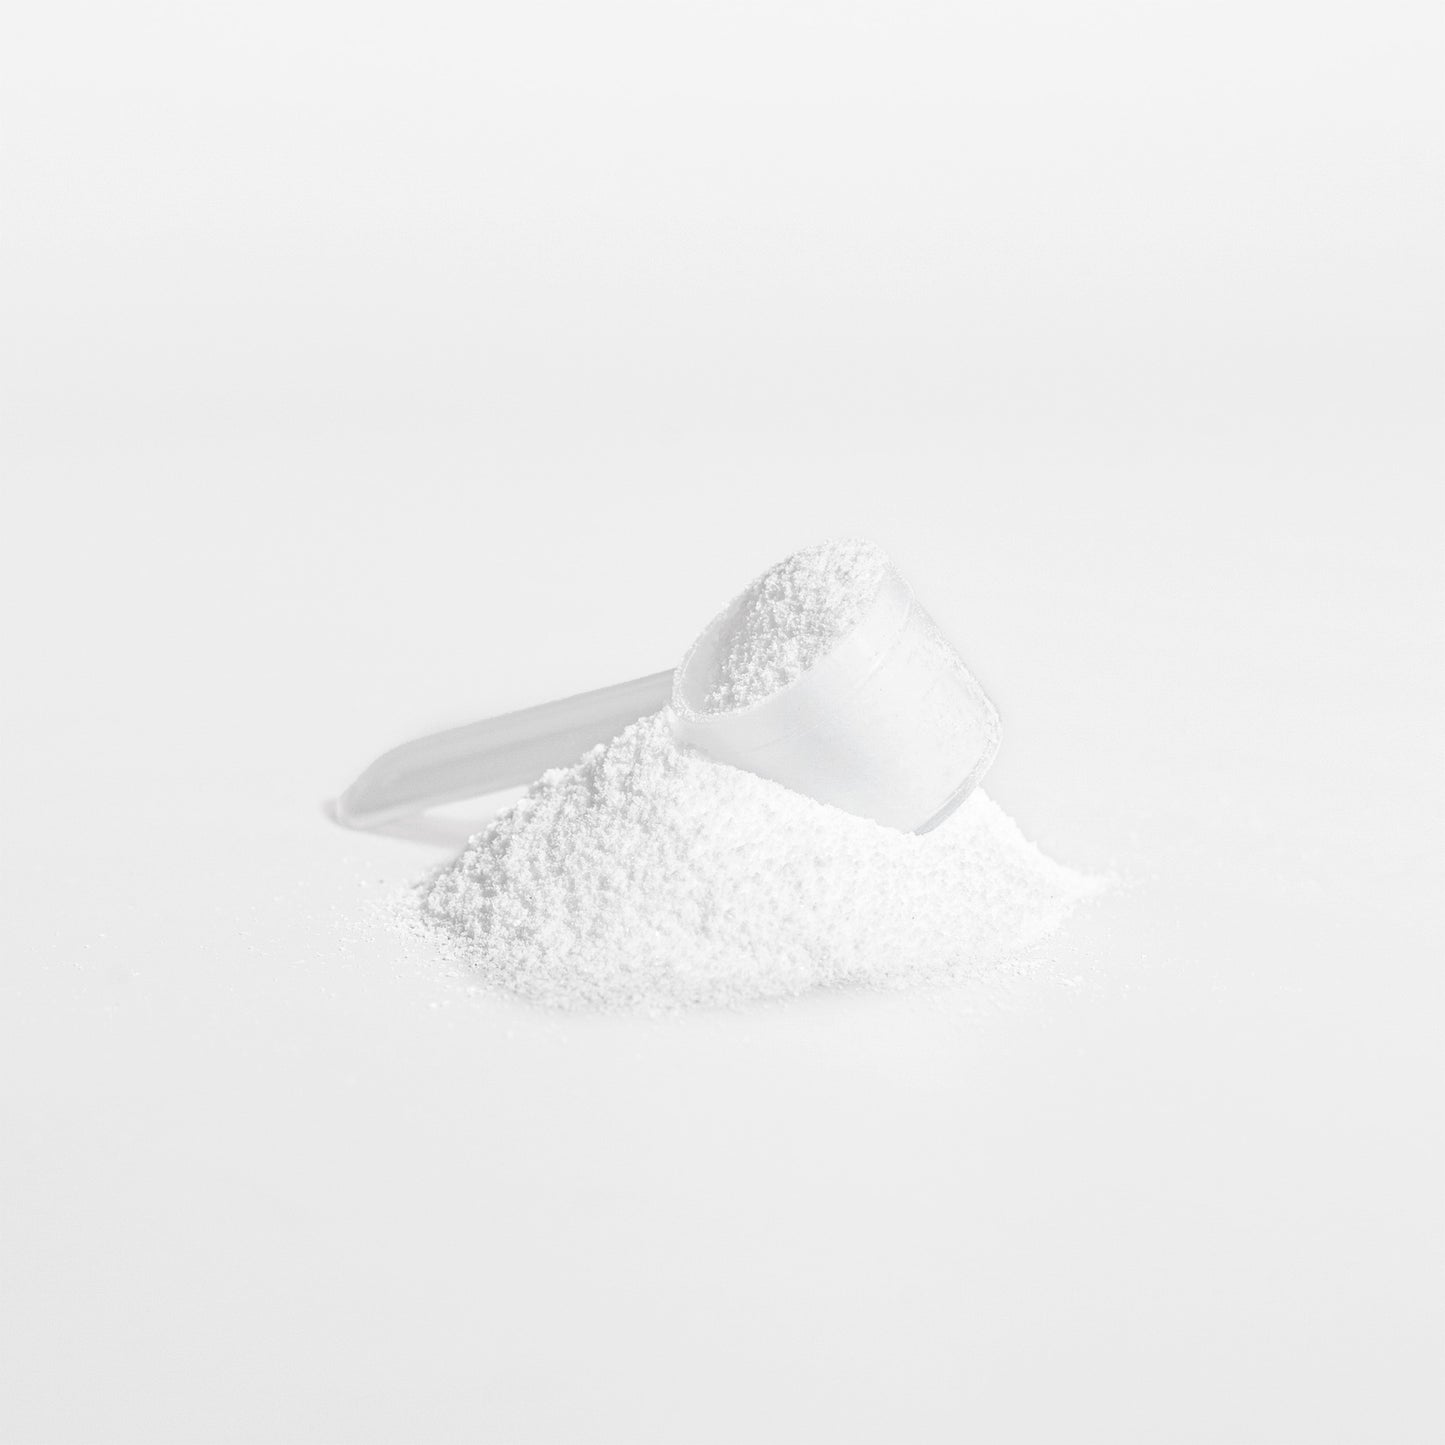 Creatine Monohydrate | 250g | Increase Strength | Lean Body Mass Growth | Muscle Energy Booster | 100% Pure